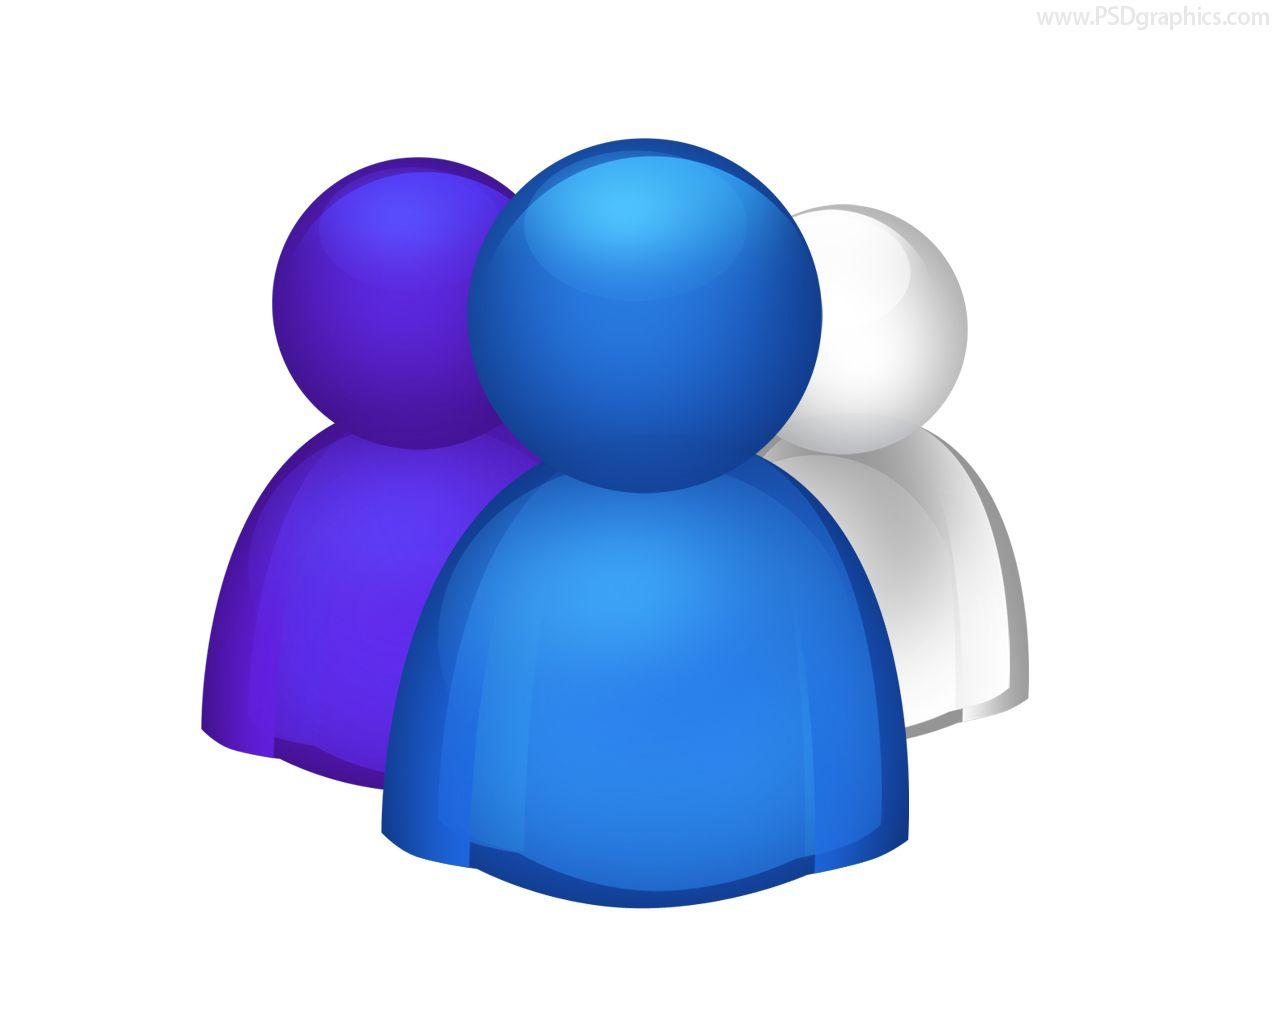 Group of people icon (PSD)